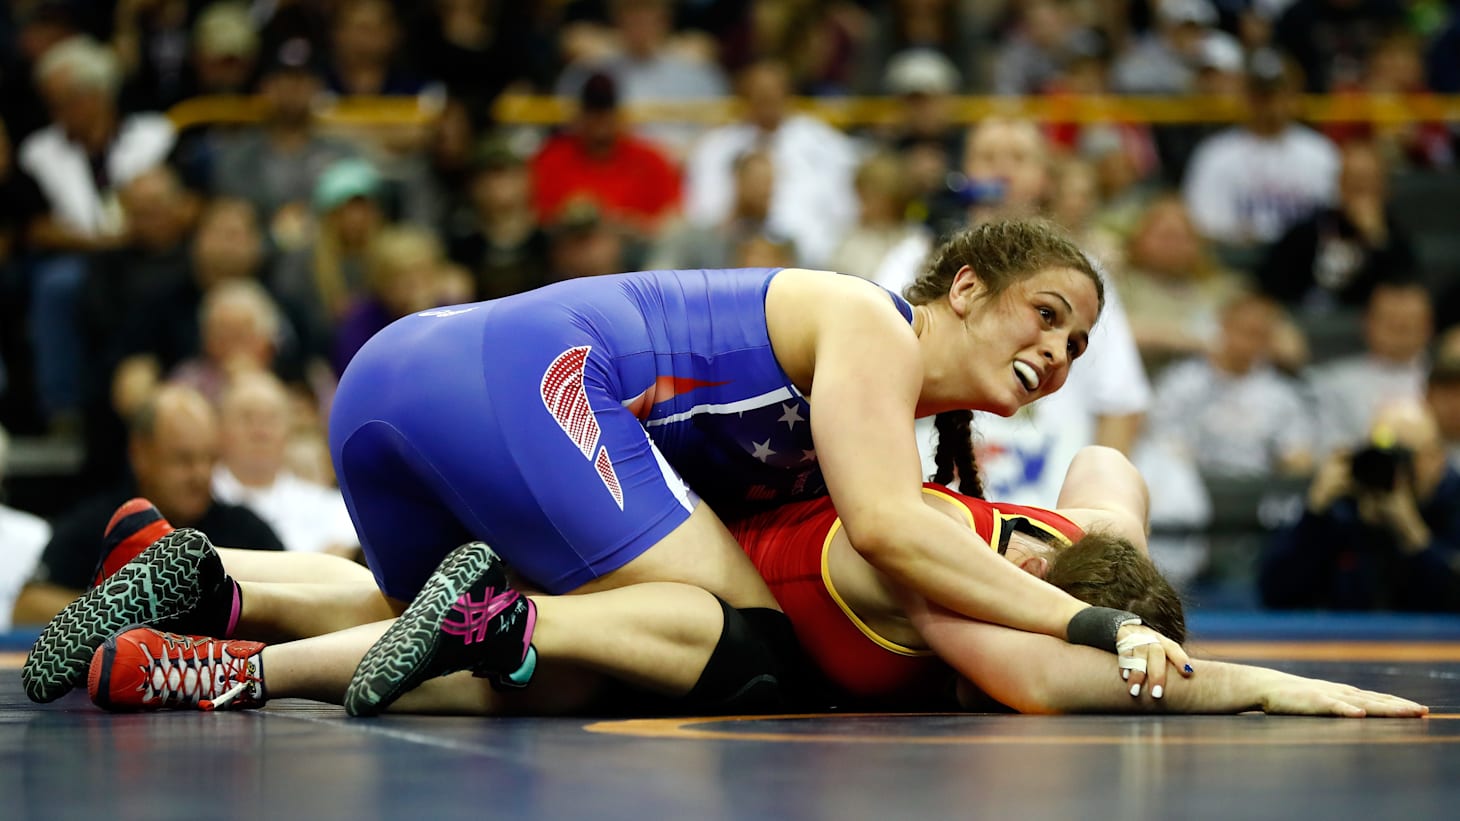 Five-time world champ Adeline Gray has changed the face of wrestling